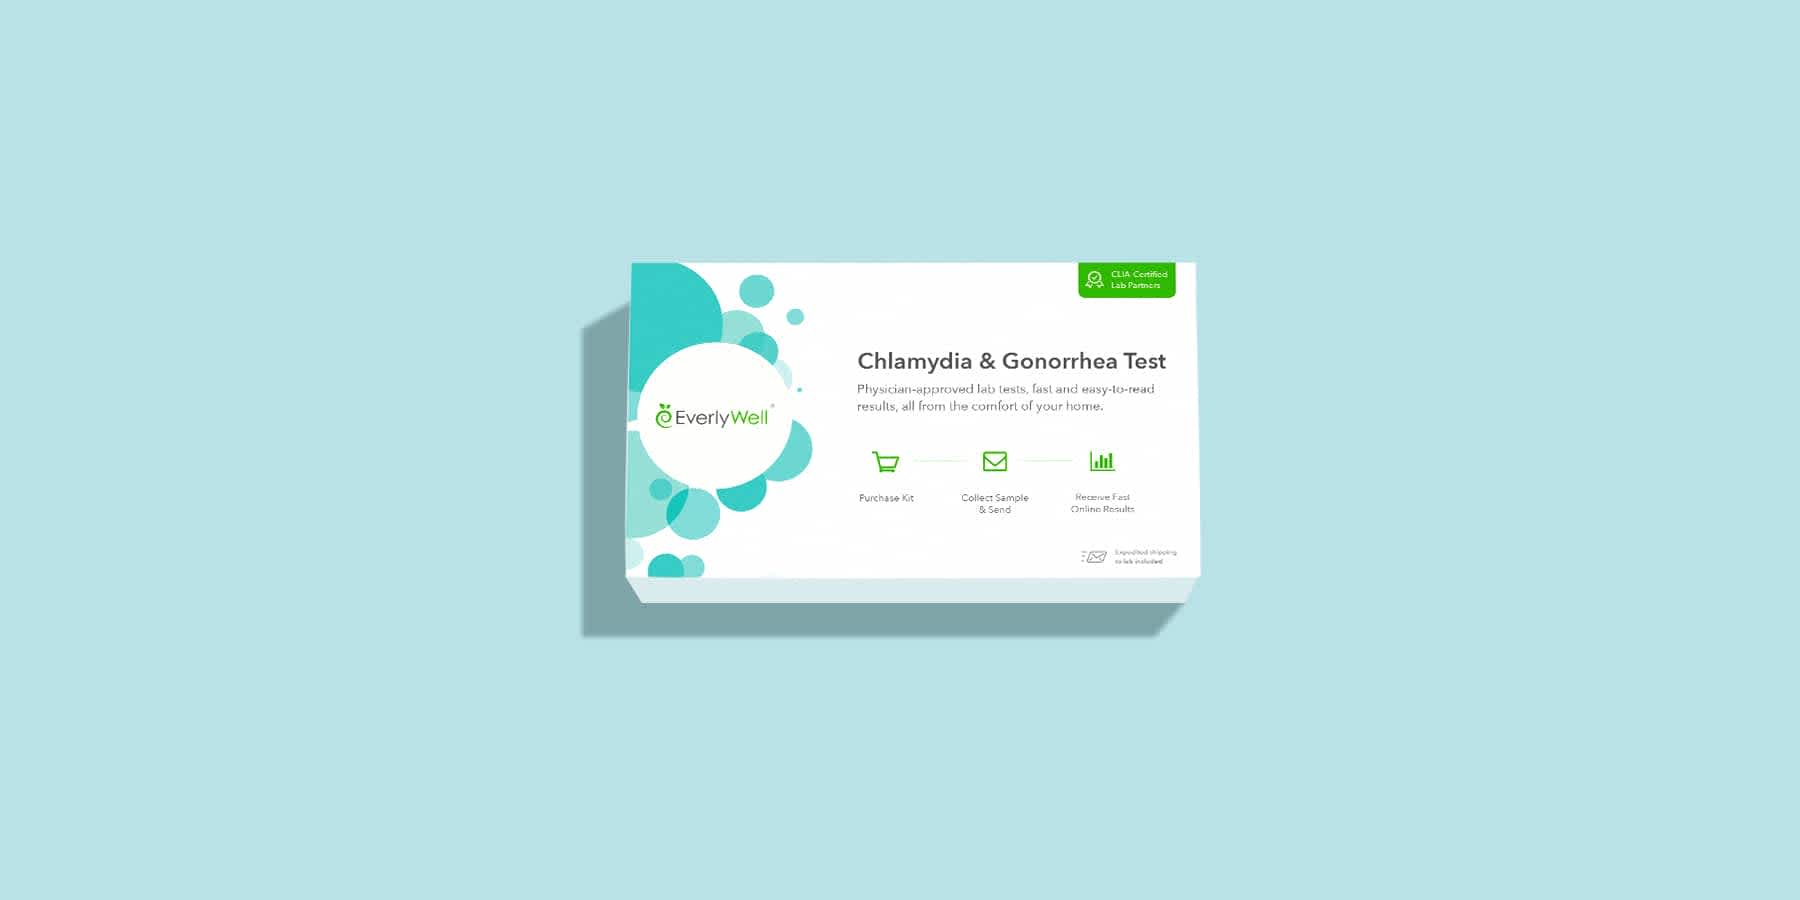 How Long Does A Chlamydia Test Take? - Blog | Everlywell: Home Health Testing Made Easy